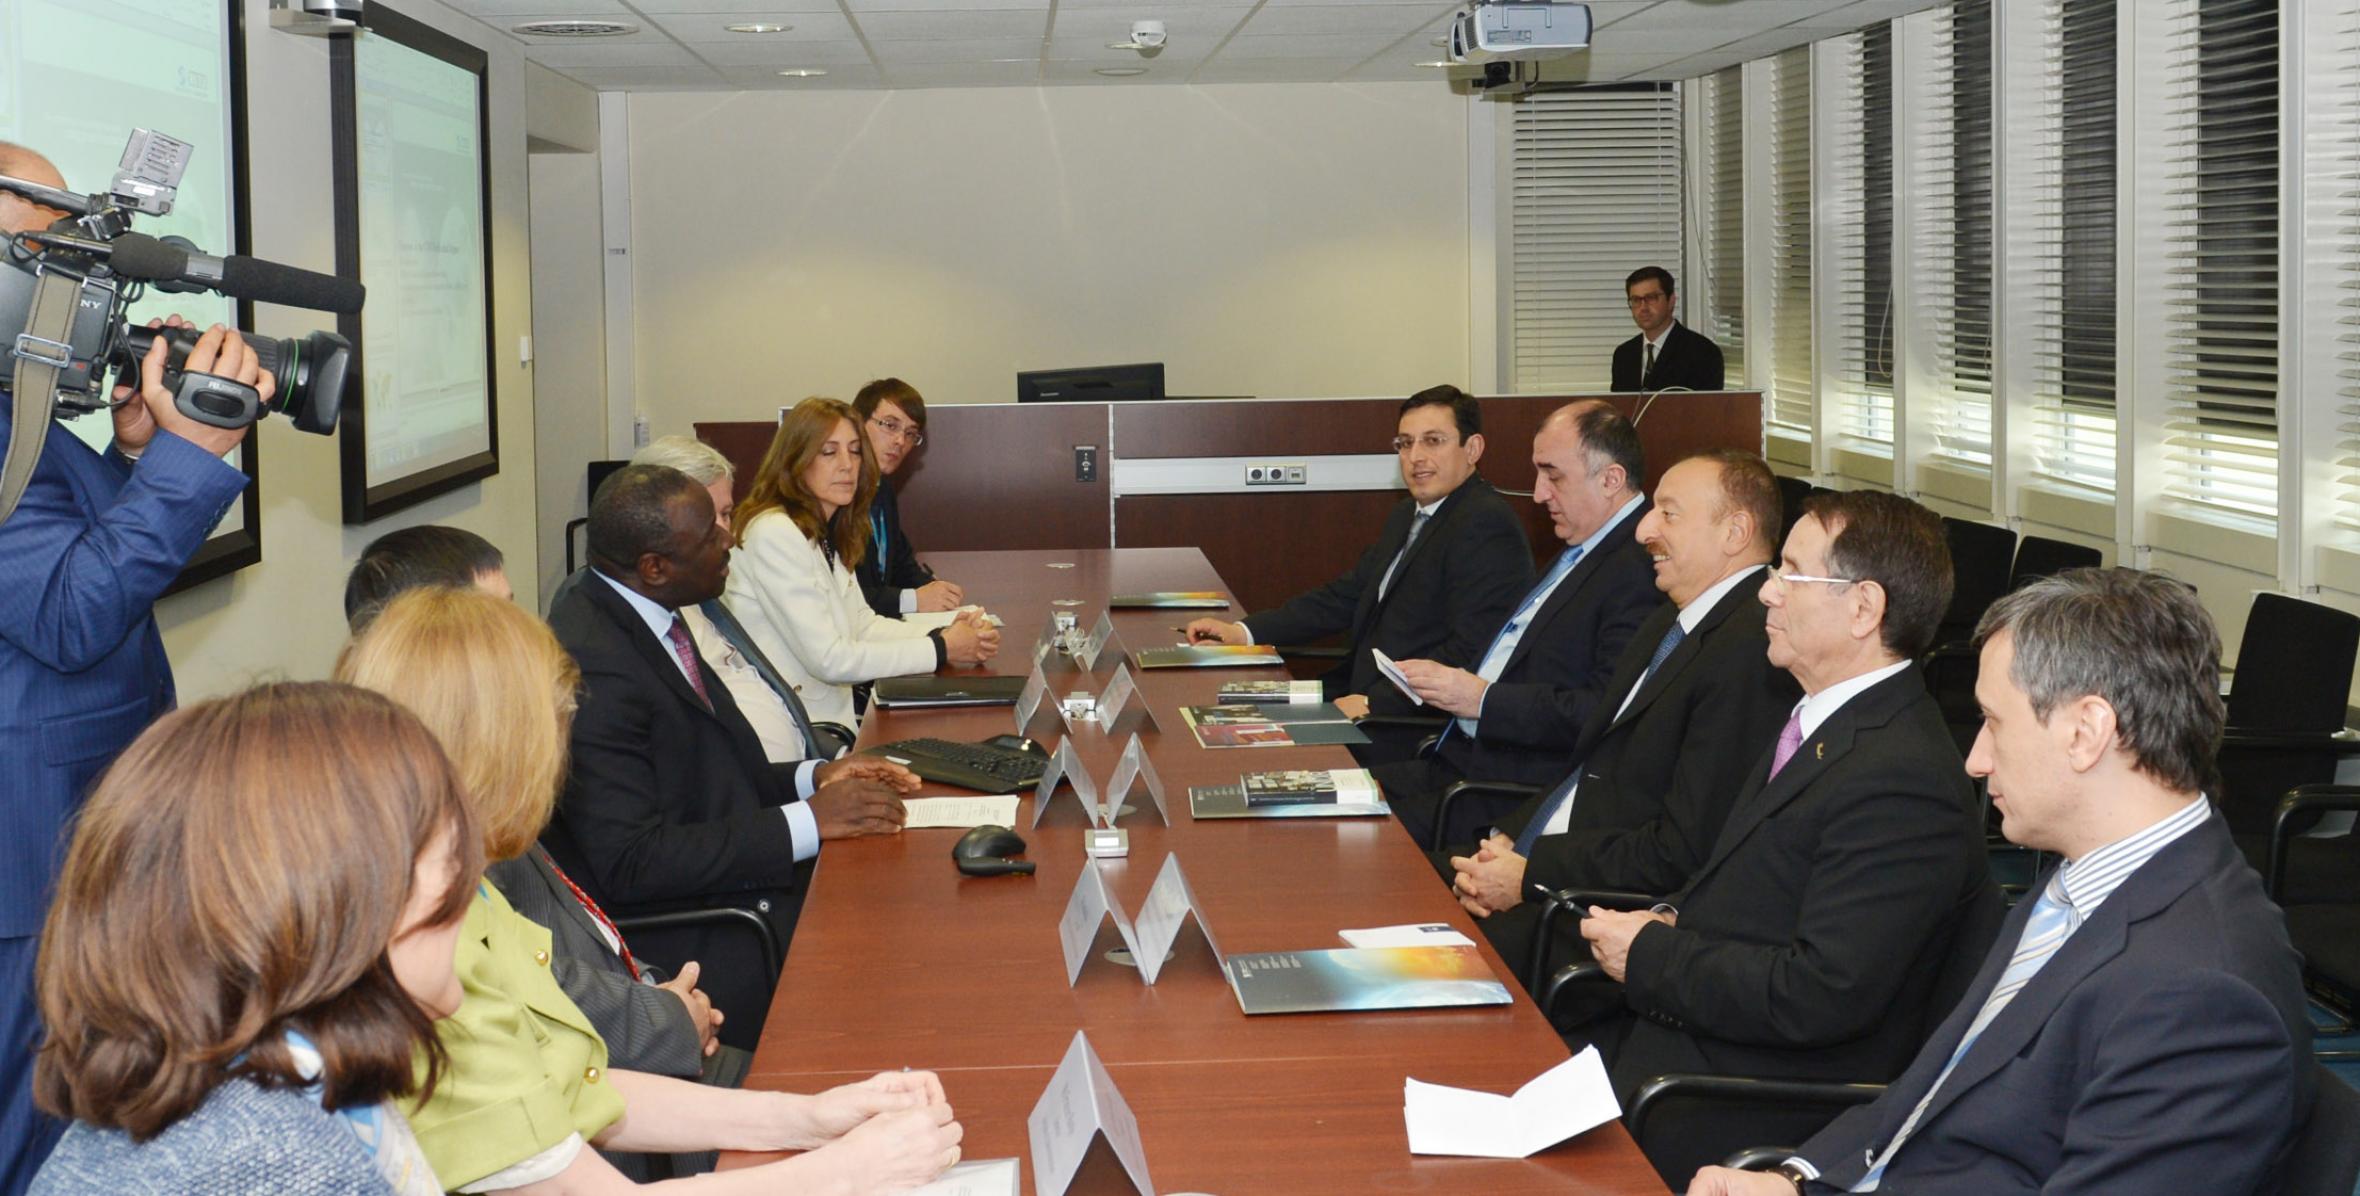 Ilham Aliyev met with the Executive Secretary of the Preparatory Commission of the Comprehensive Nuclear Test Ban Treaty in Vienna